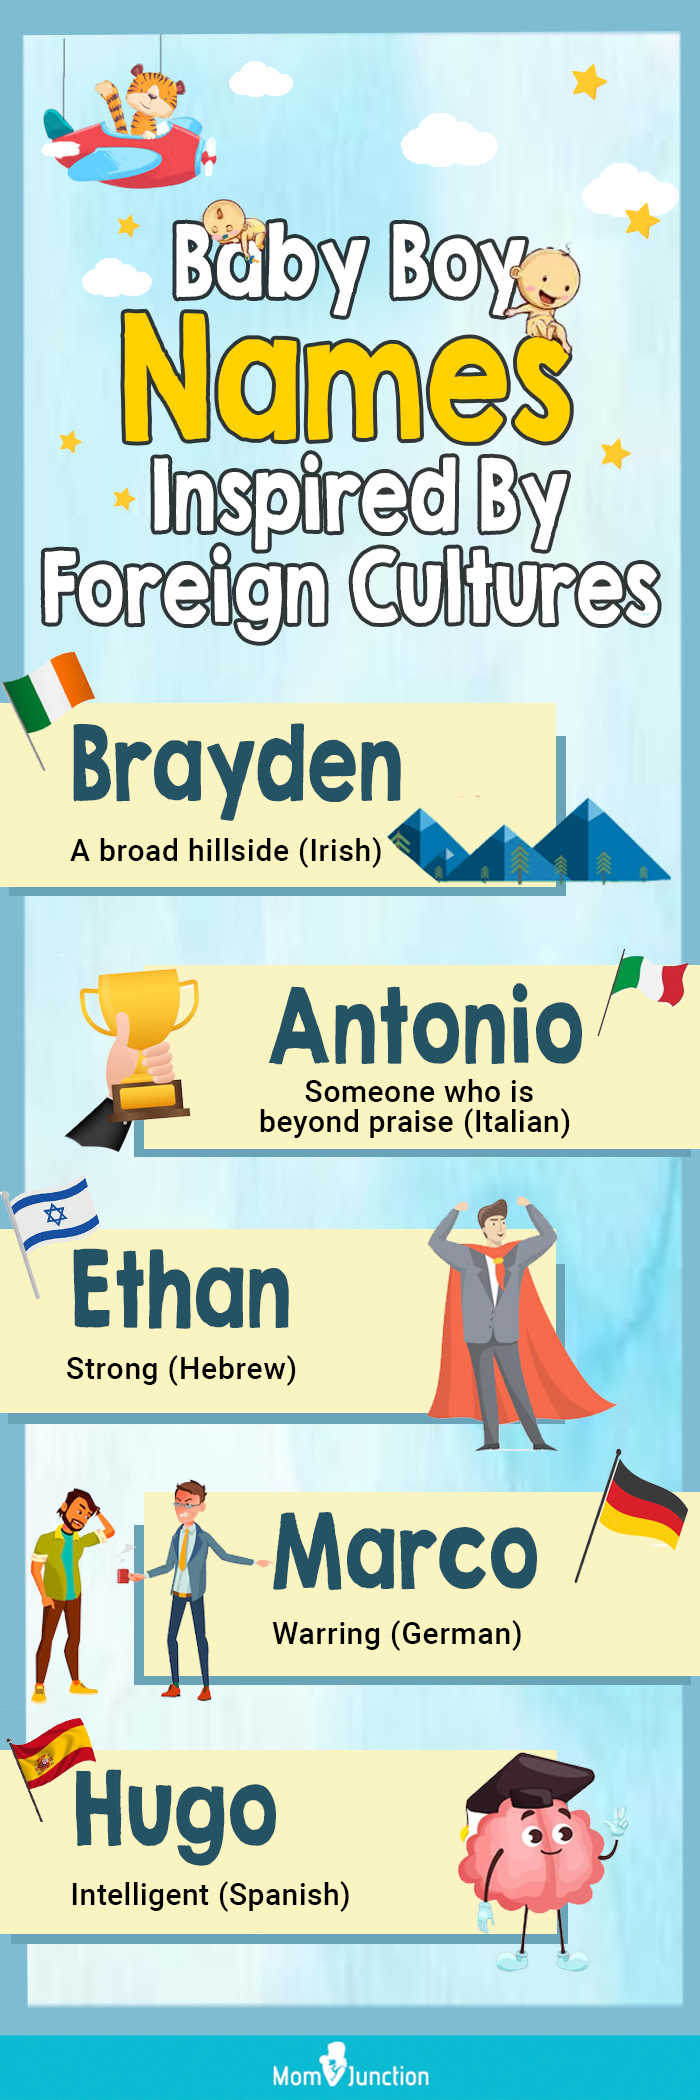 baby boy names inspired by foreign cultures (infographic)